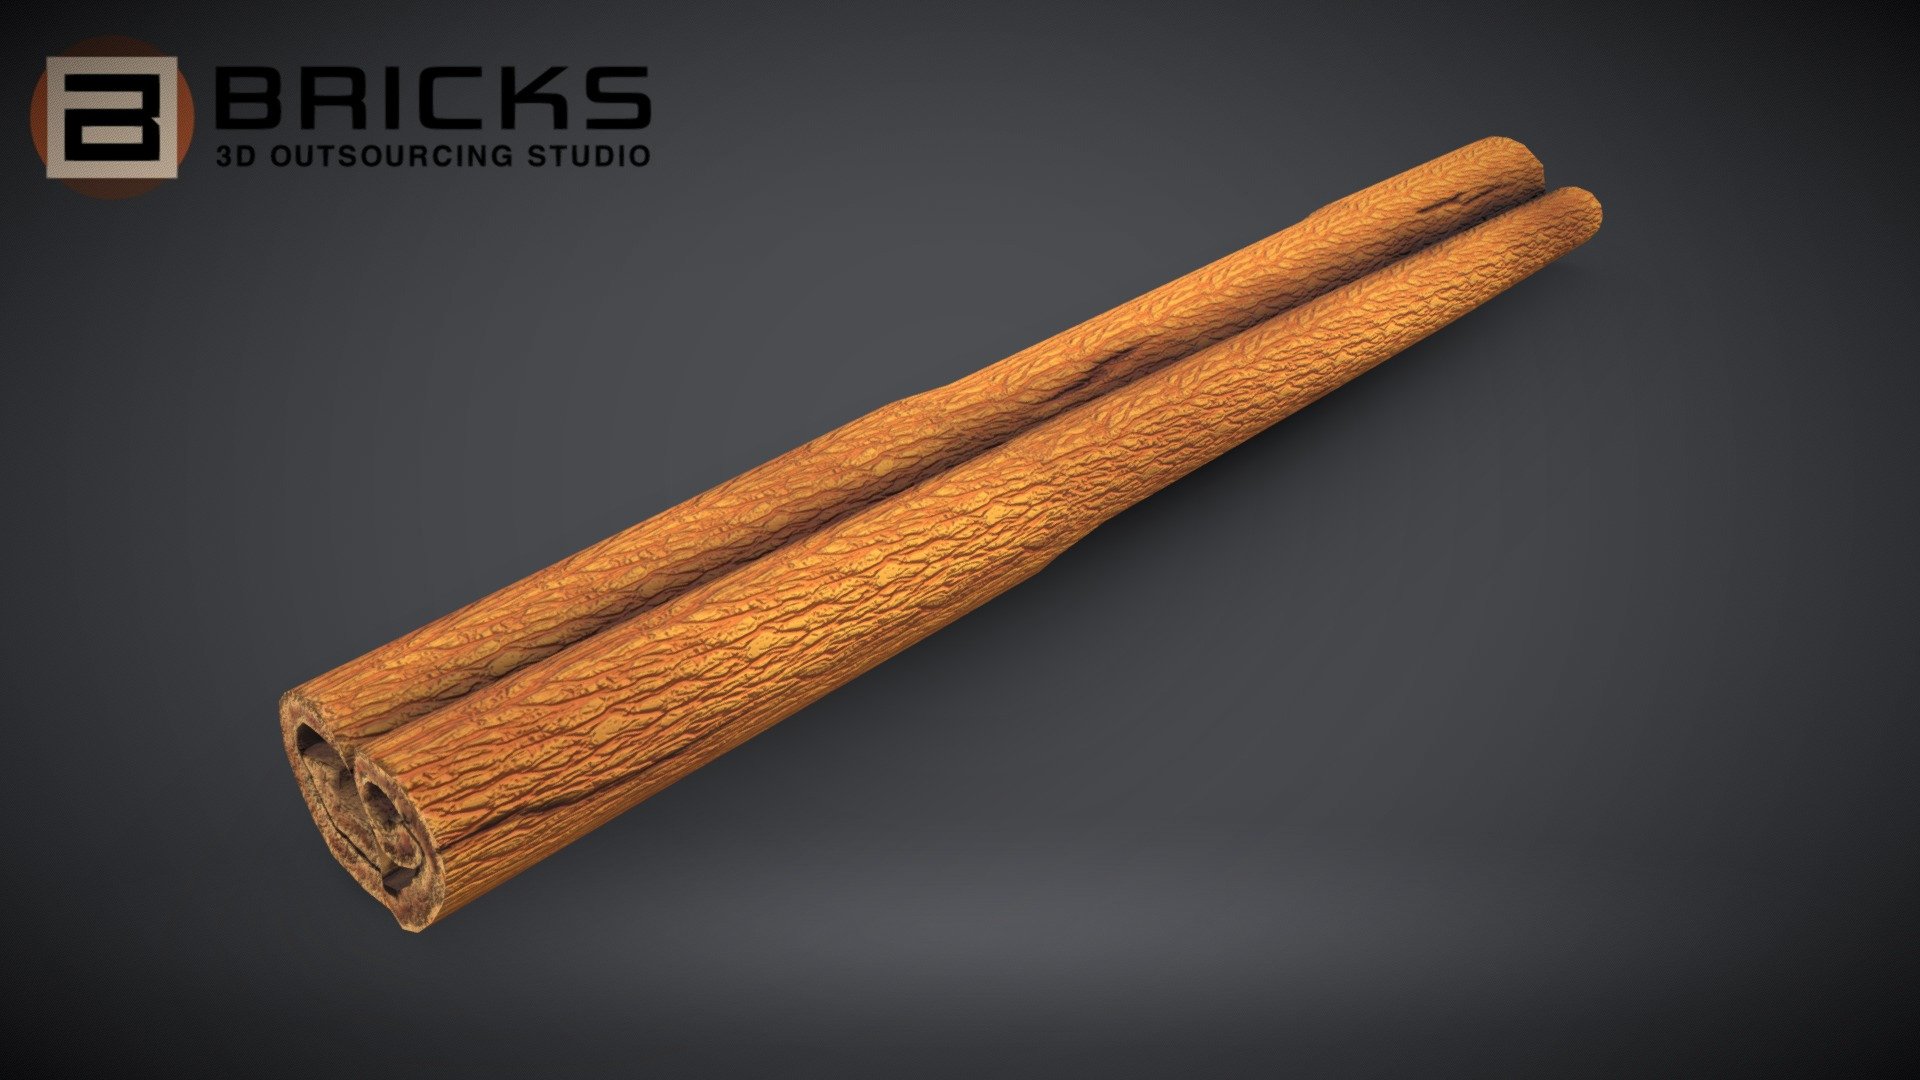 PBR Food Asset:
CinnamonStick
Polycount: 400
Vertex count: 202
Texture Size: 2048px x 2048px
Normal: OpenGL

If you need any adjust in file please contact us: team@bricks3dstudio.com

Hire us: tringuyen@bricks3dstudio.com
Here is us: https://www.bricks3dstudio.com/
        https://www.artstation.com/bricksstudio
        https://www.facebook.com/Bricks3dstudio/
        https://www.linkedin.com/in/bricks-studio-b10462252/ - Cinnamon Stick - Buy Royalty Free 3D model by Bricks Studio (@bricks3dstudio) 3d model